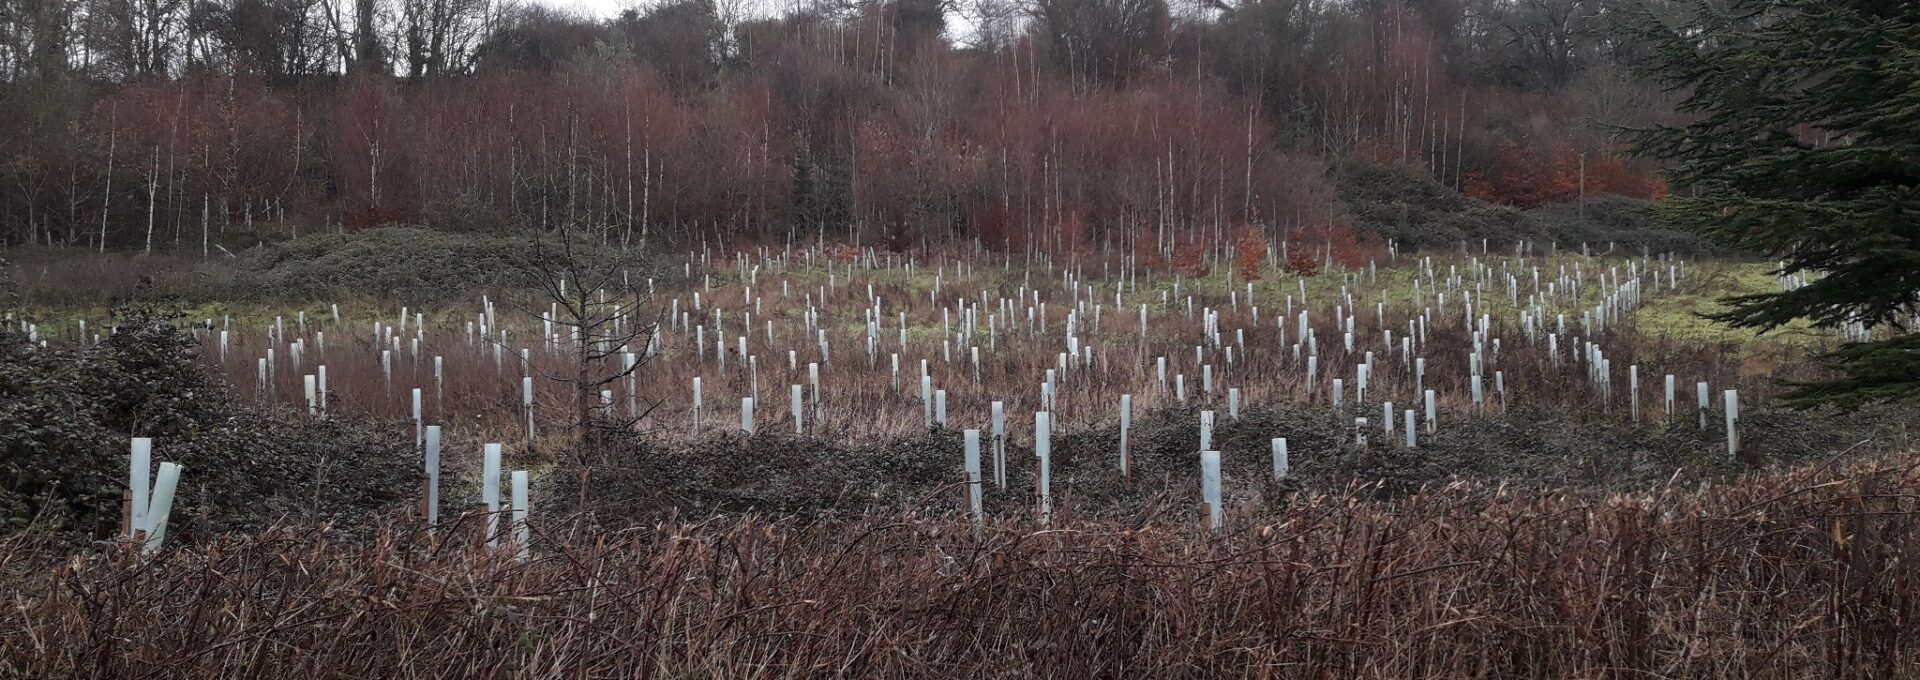 A small patch of bare ground with a number of young trees that have recently been planted. The young trees are in tree guards.